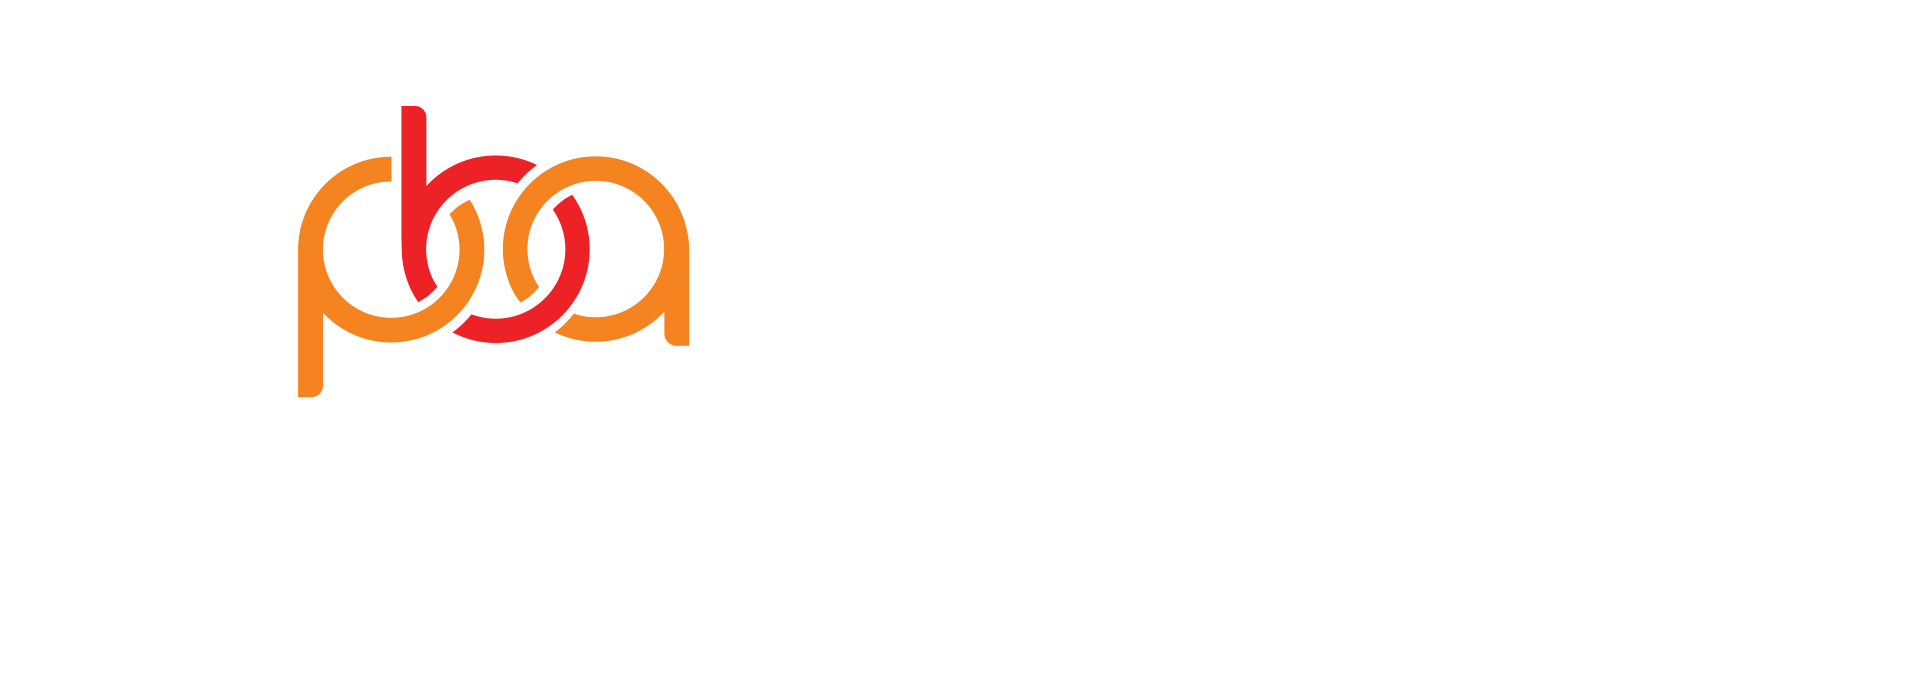 Partners Available to Help after Adoption and Guardianship